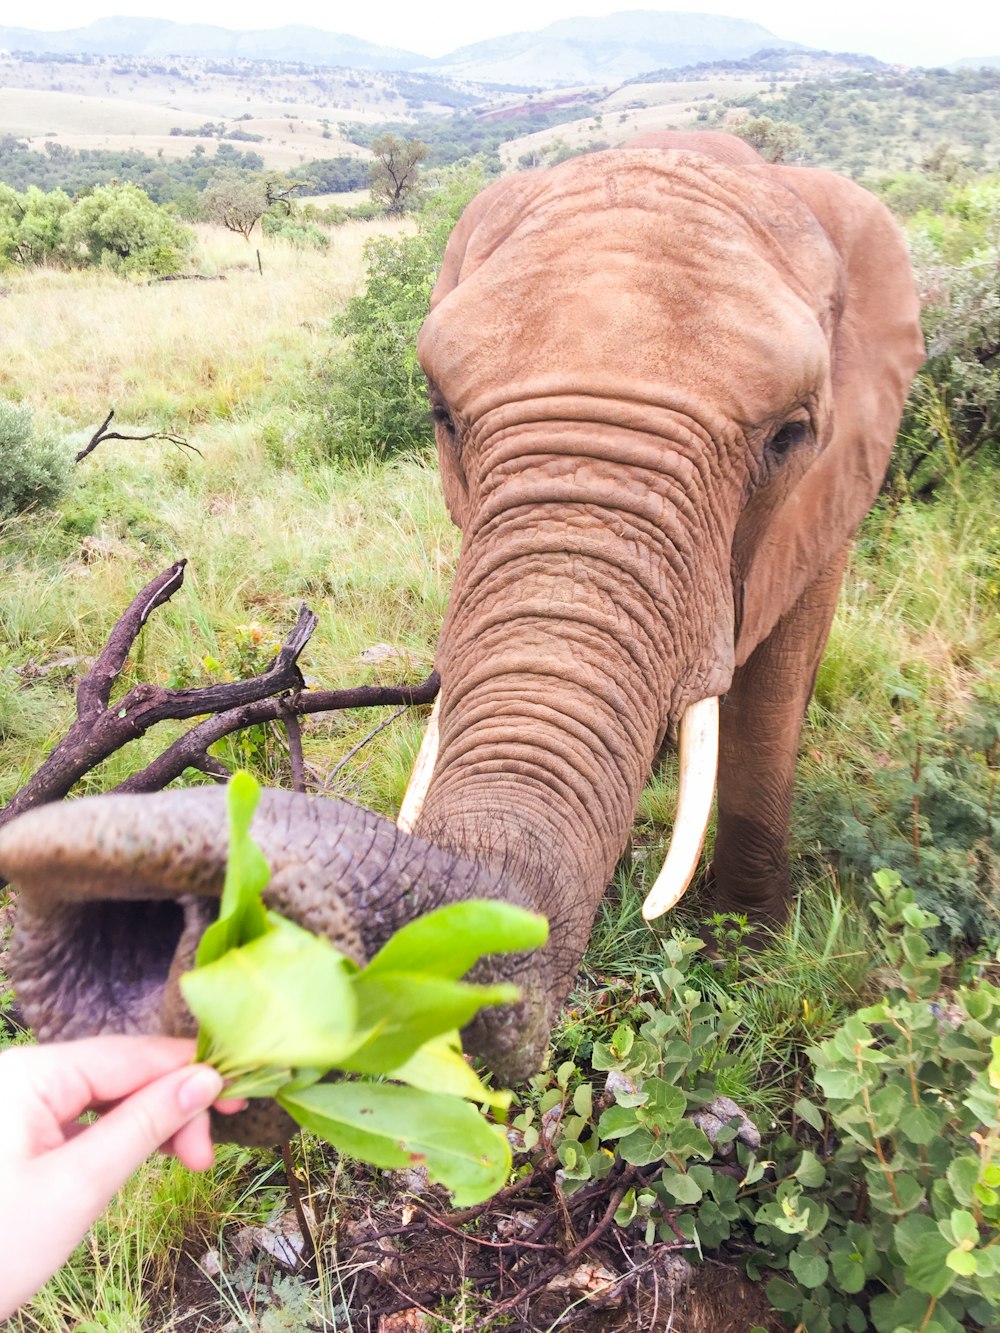 brown elephant eating green plant during daytime